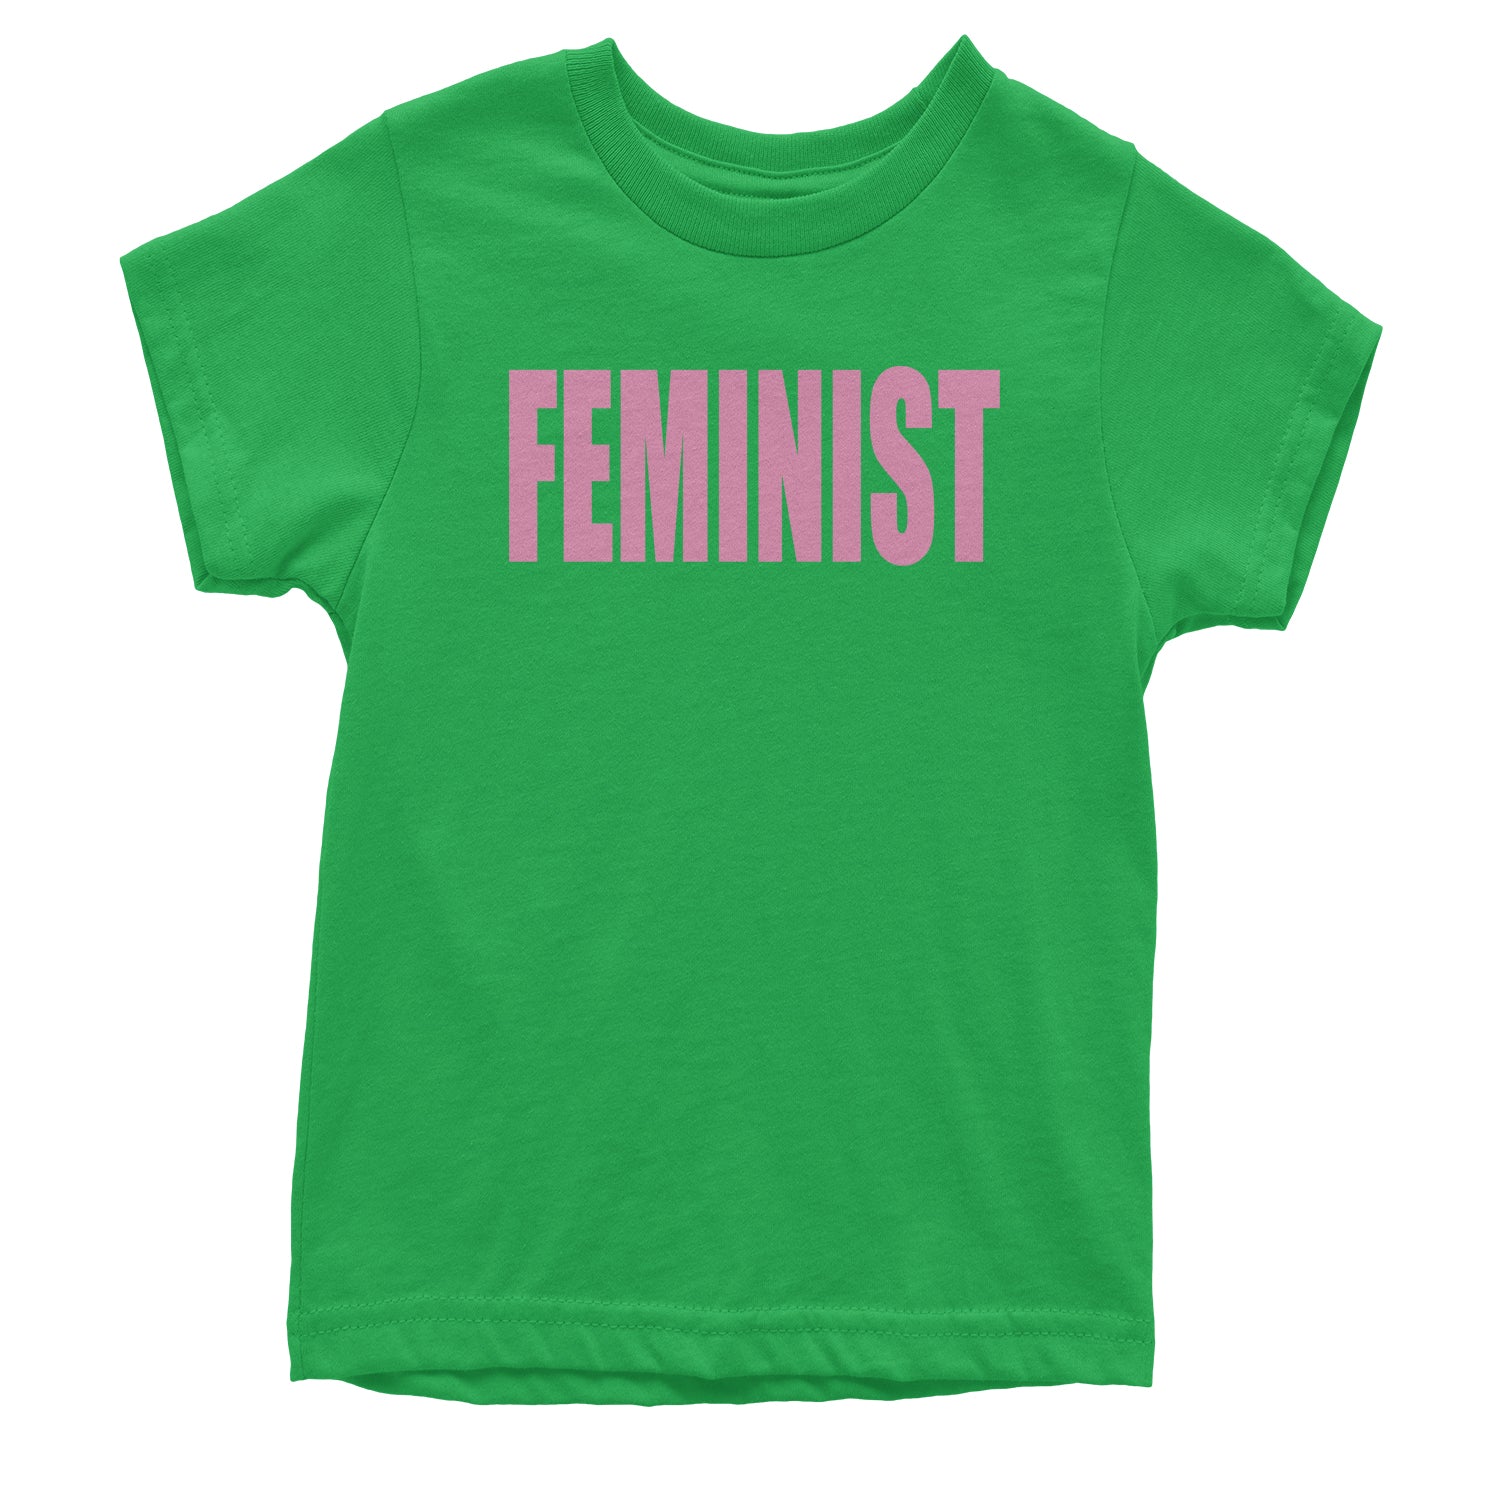 Feminist (Pink Print) Youth T-shirt a, equal, equality, feminism, feminist, gender, is, lgbtq, like, looks, nevertheless, pay, persisted, rights, she, this, what by Expression Tees